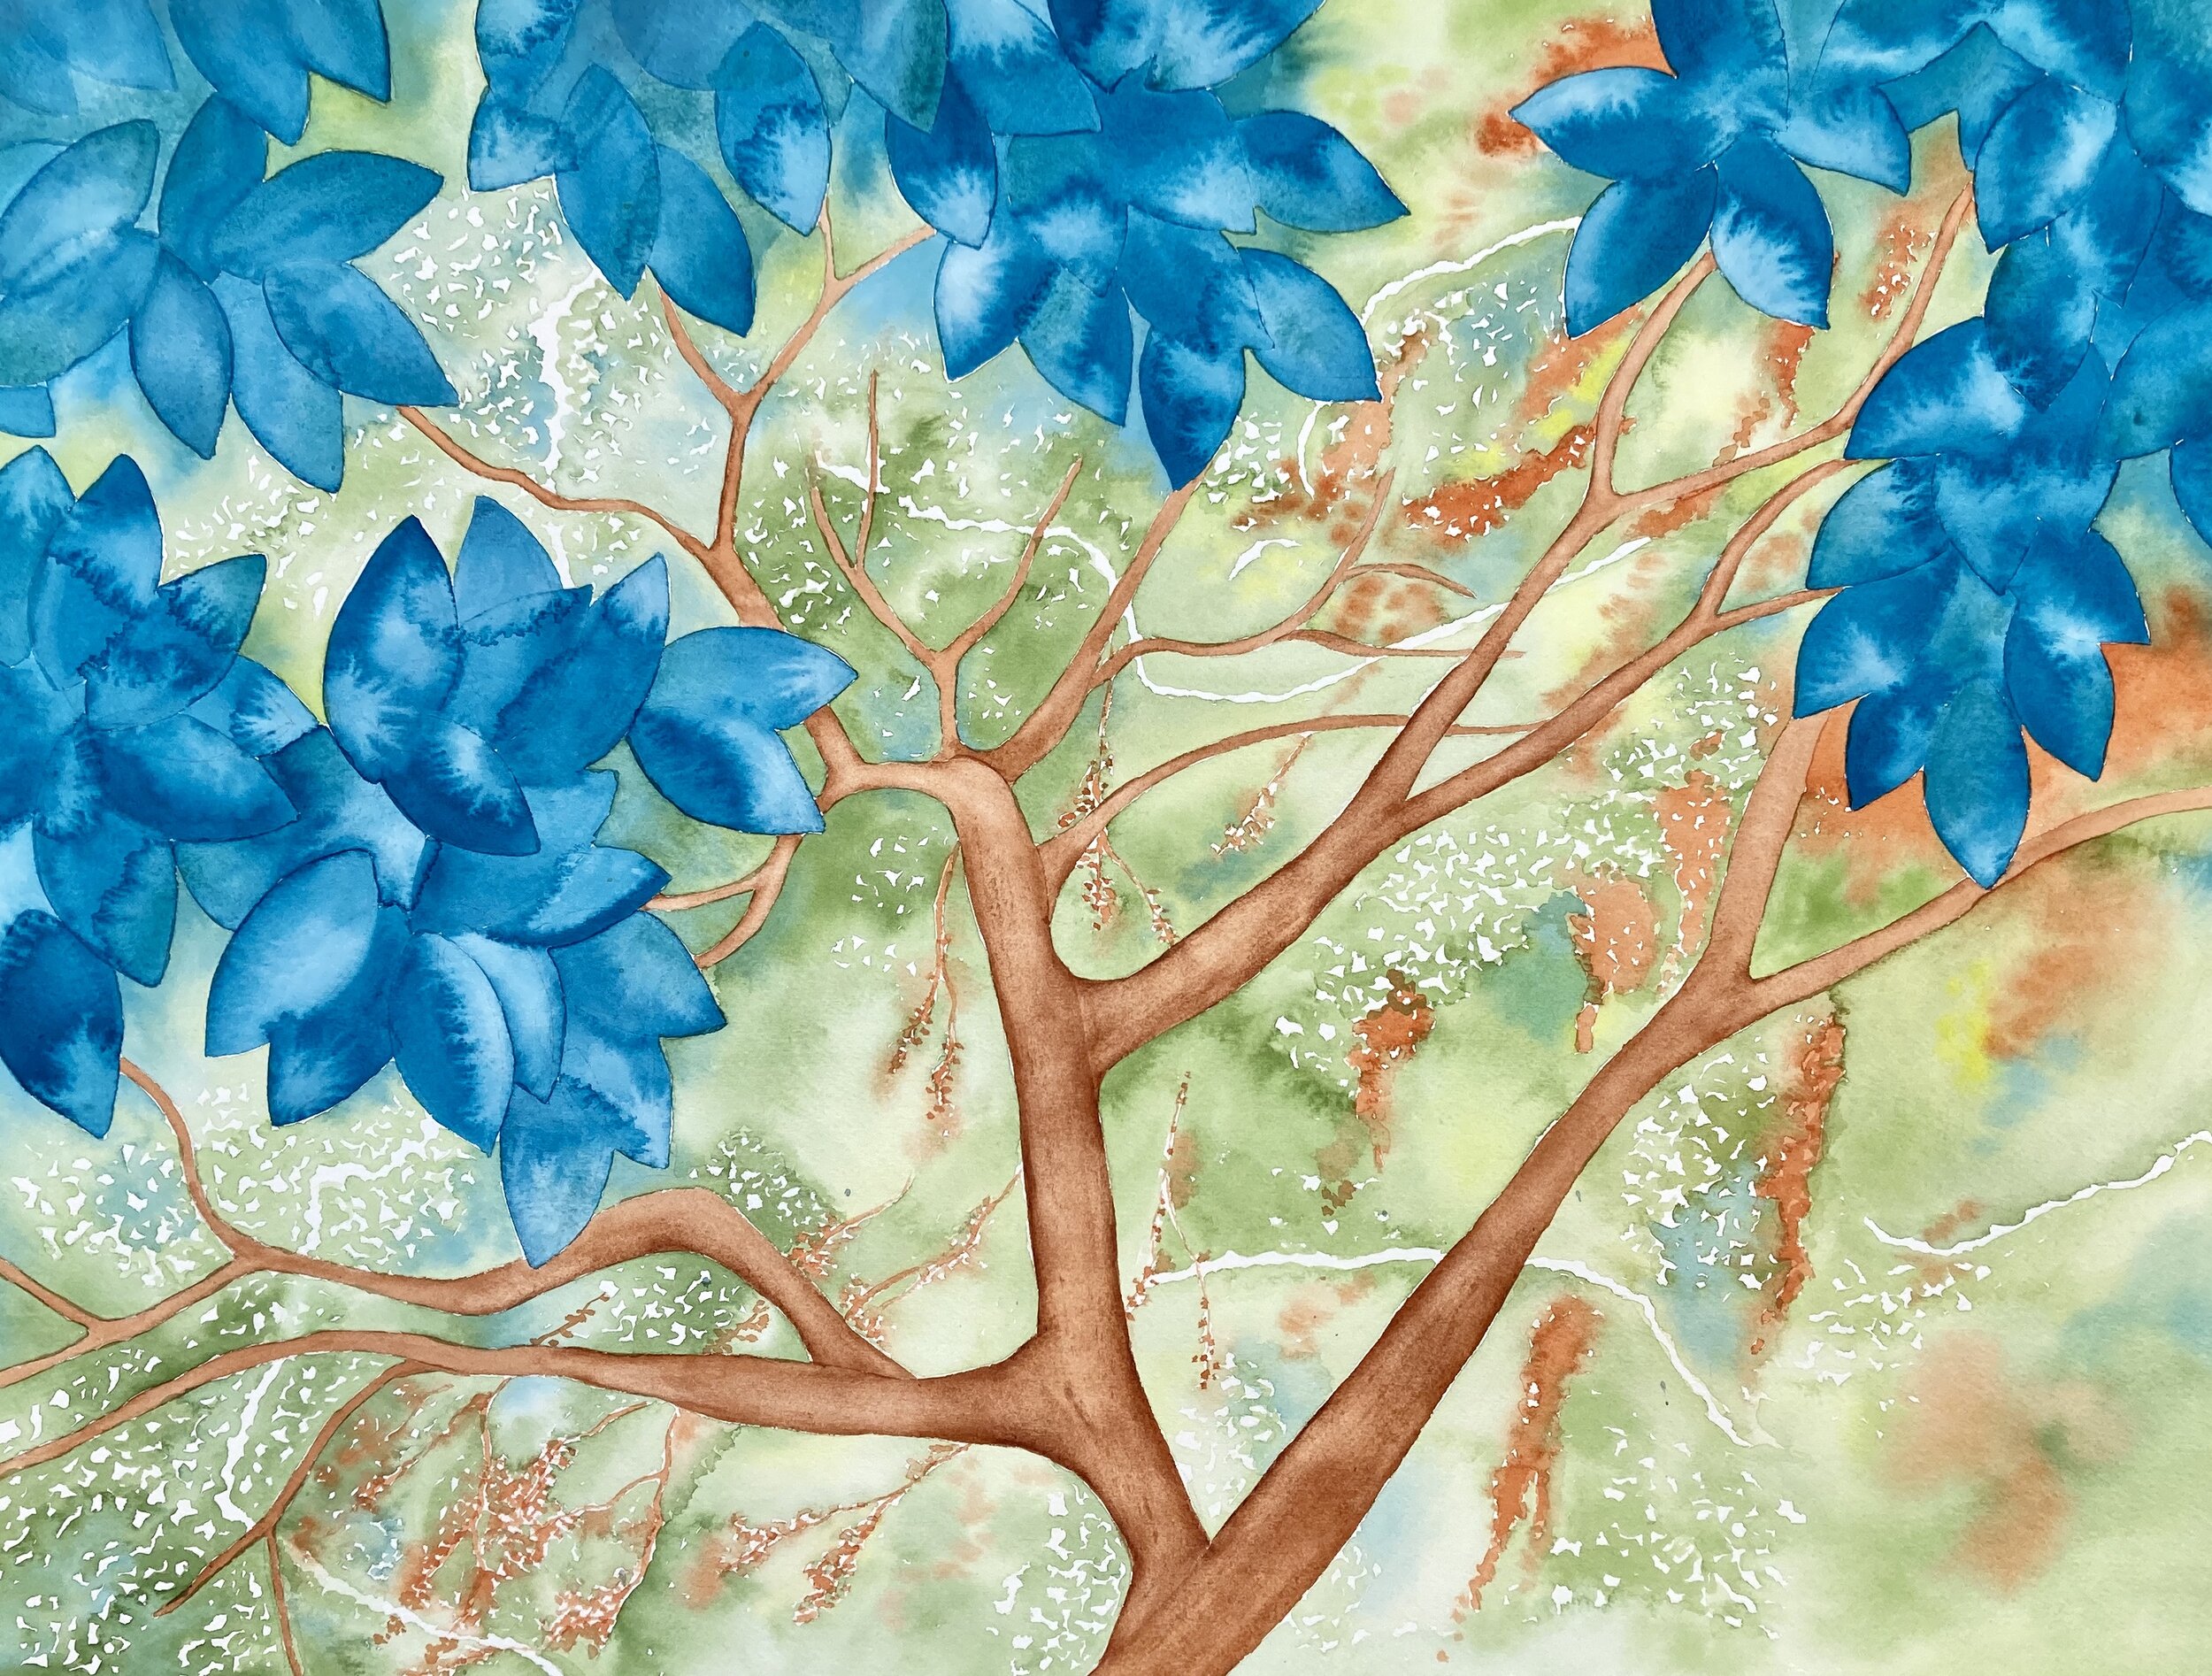 Jungle Tree with Blue